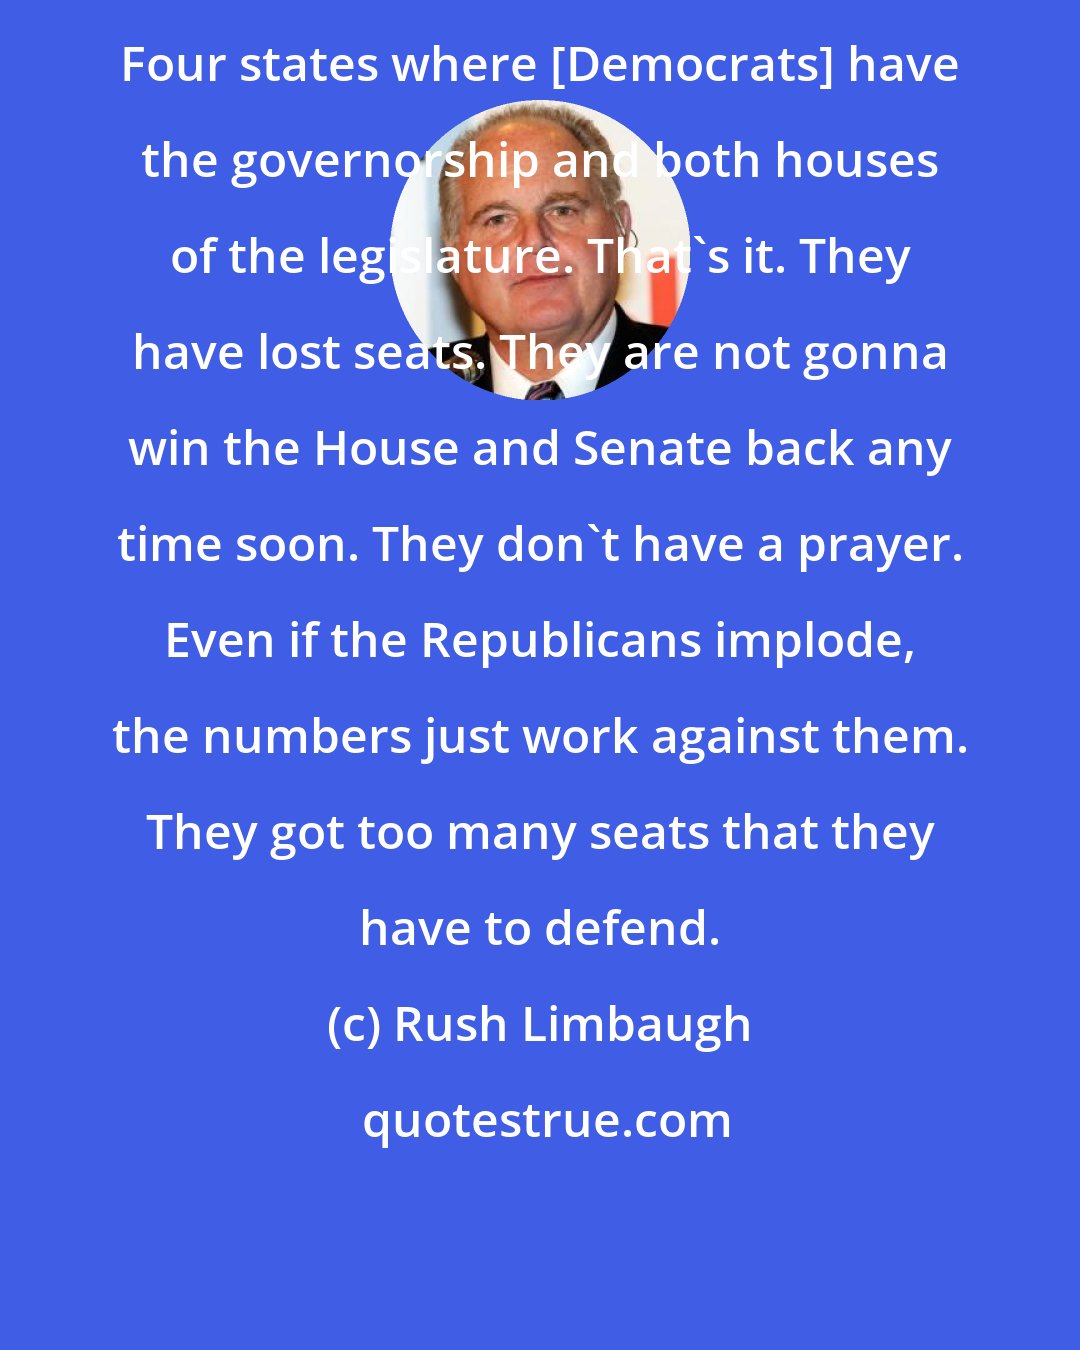 Rush Limbaugh: Four states where [Democrats] have the governorship and both houses of the legislature. That's it. They have lost seats. They are not gonna win the House and Senate back any time soon. They don't have a prayer. Even if the Republicans implode, the numbers just work against them. They got too many seats that they have to defend.